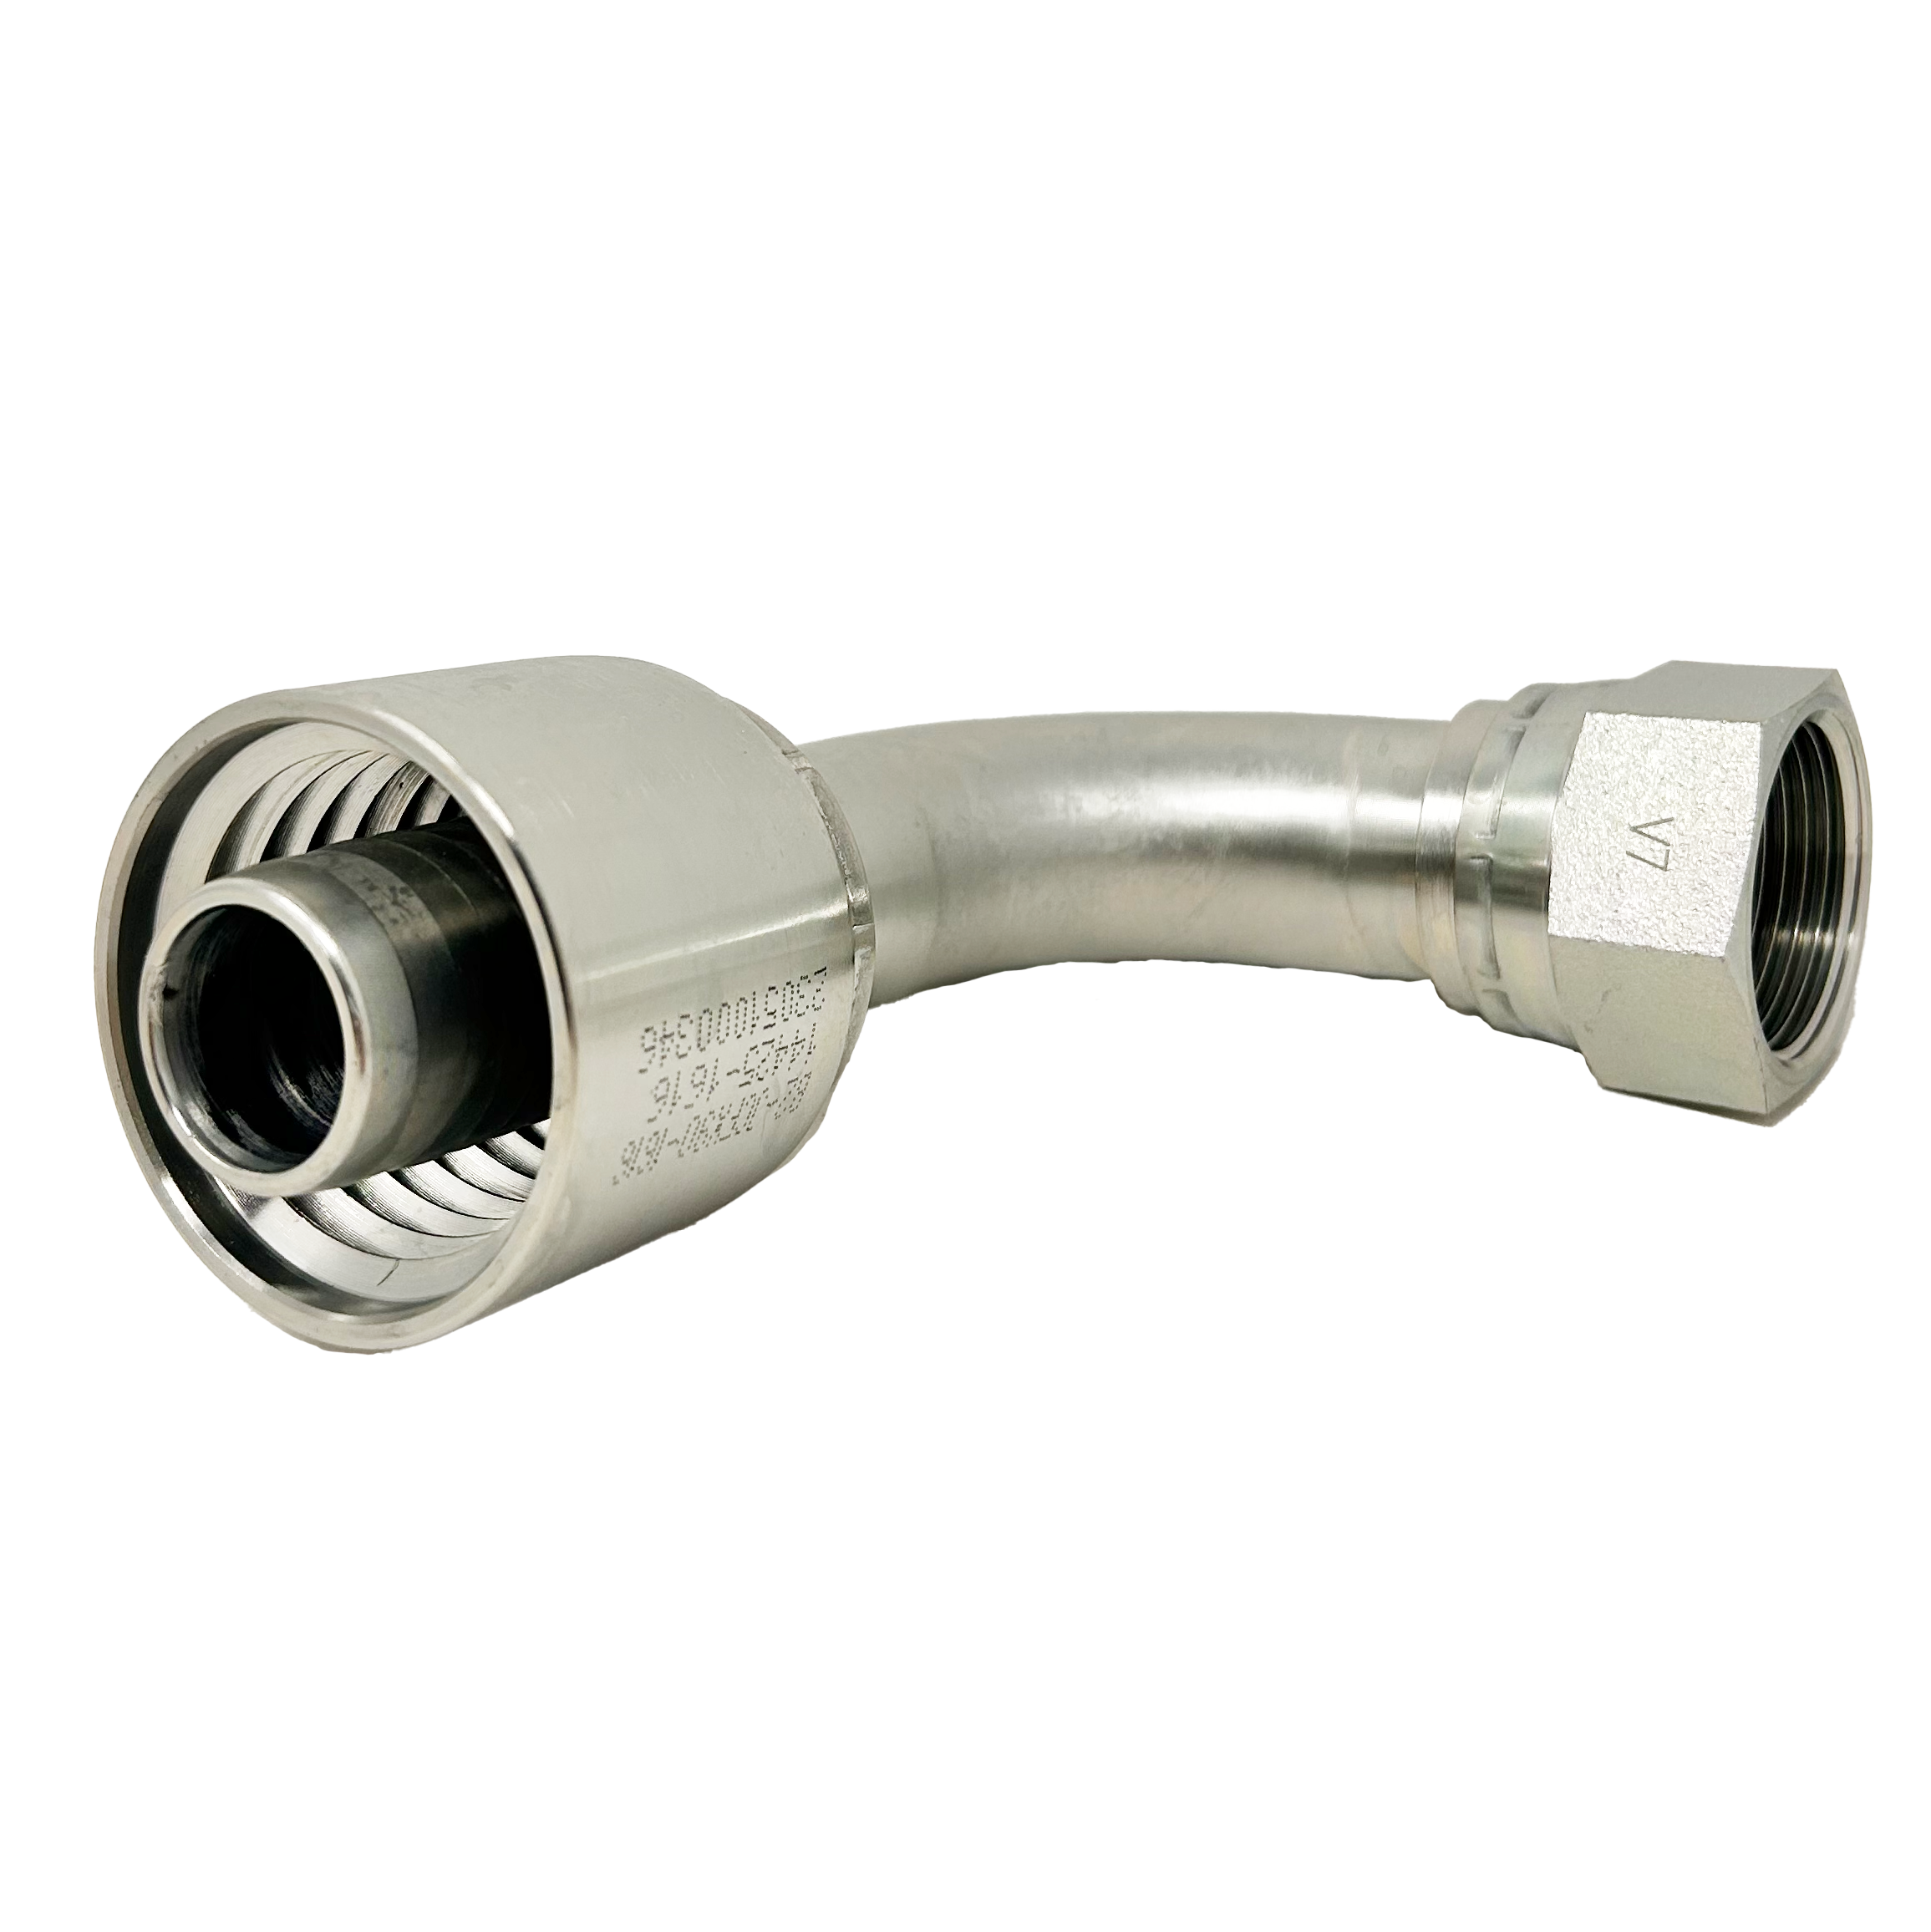 B2-JCFX90-1210: Continental Hose Fitting, 0.75 (3/4") Hose ID x 7/8-14 Female JIC, 90-Degree Swivel Connection